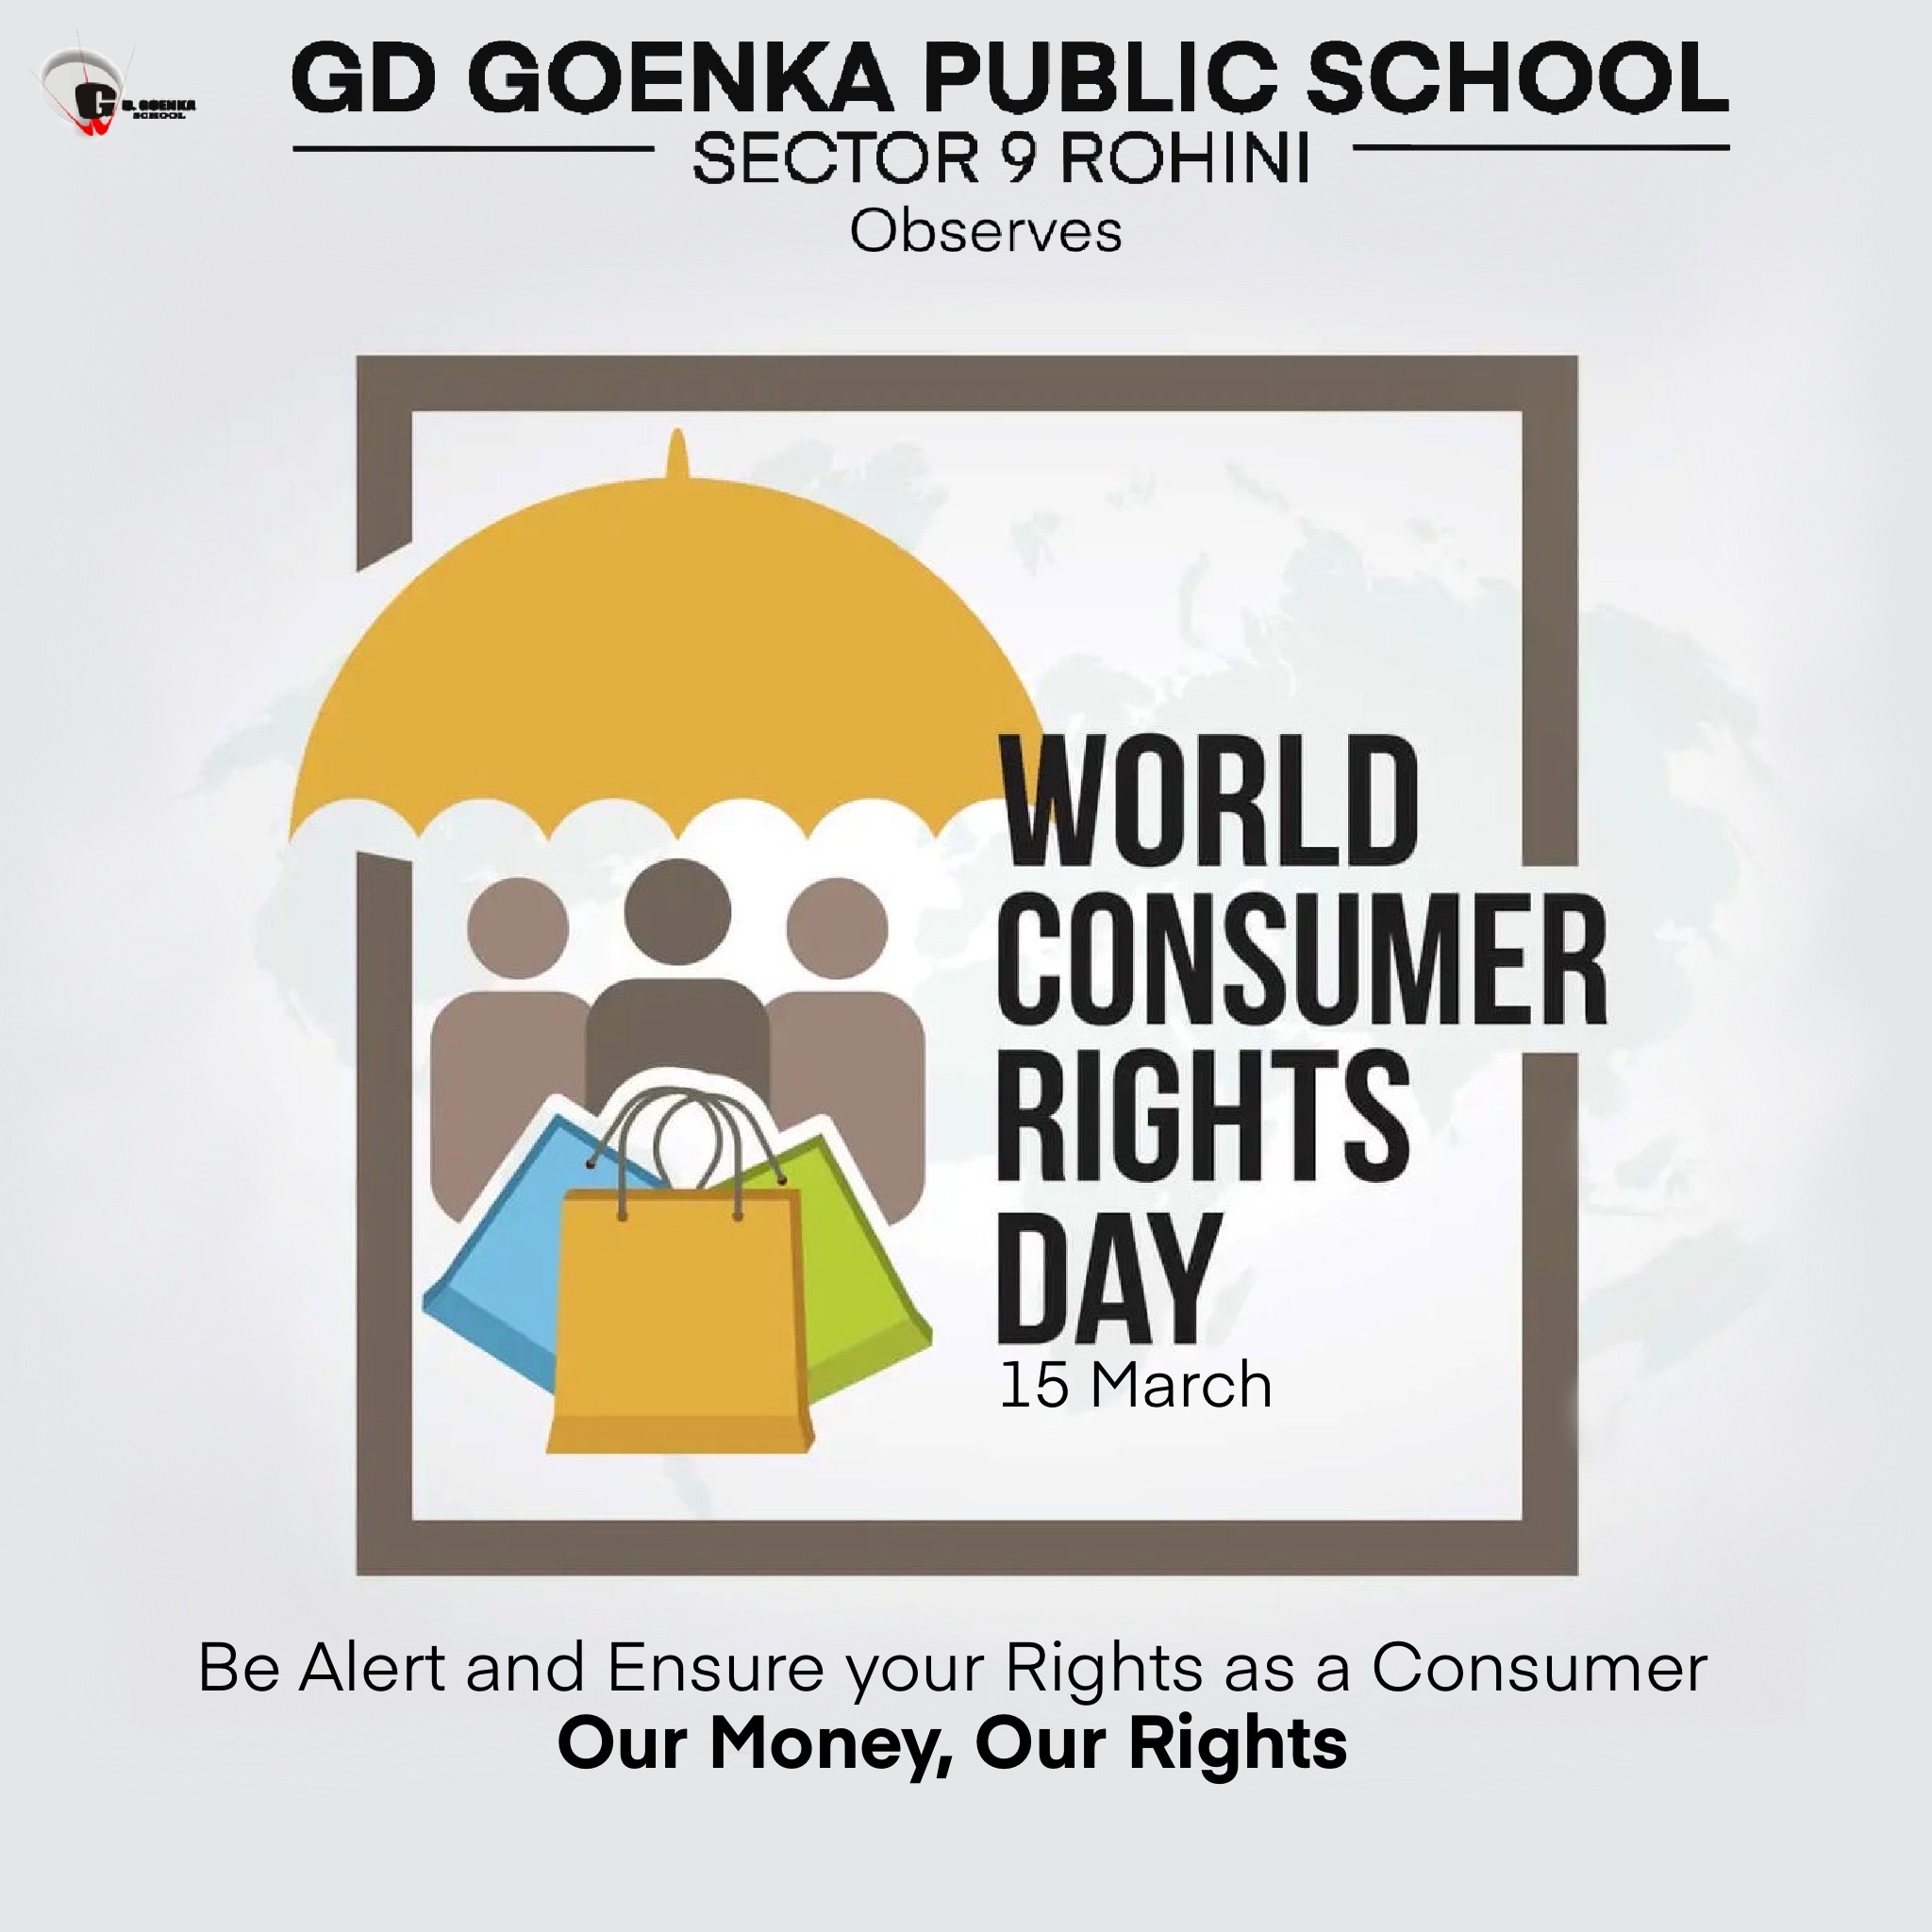 consumer rights awareness posters